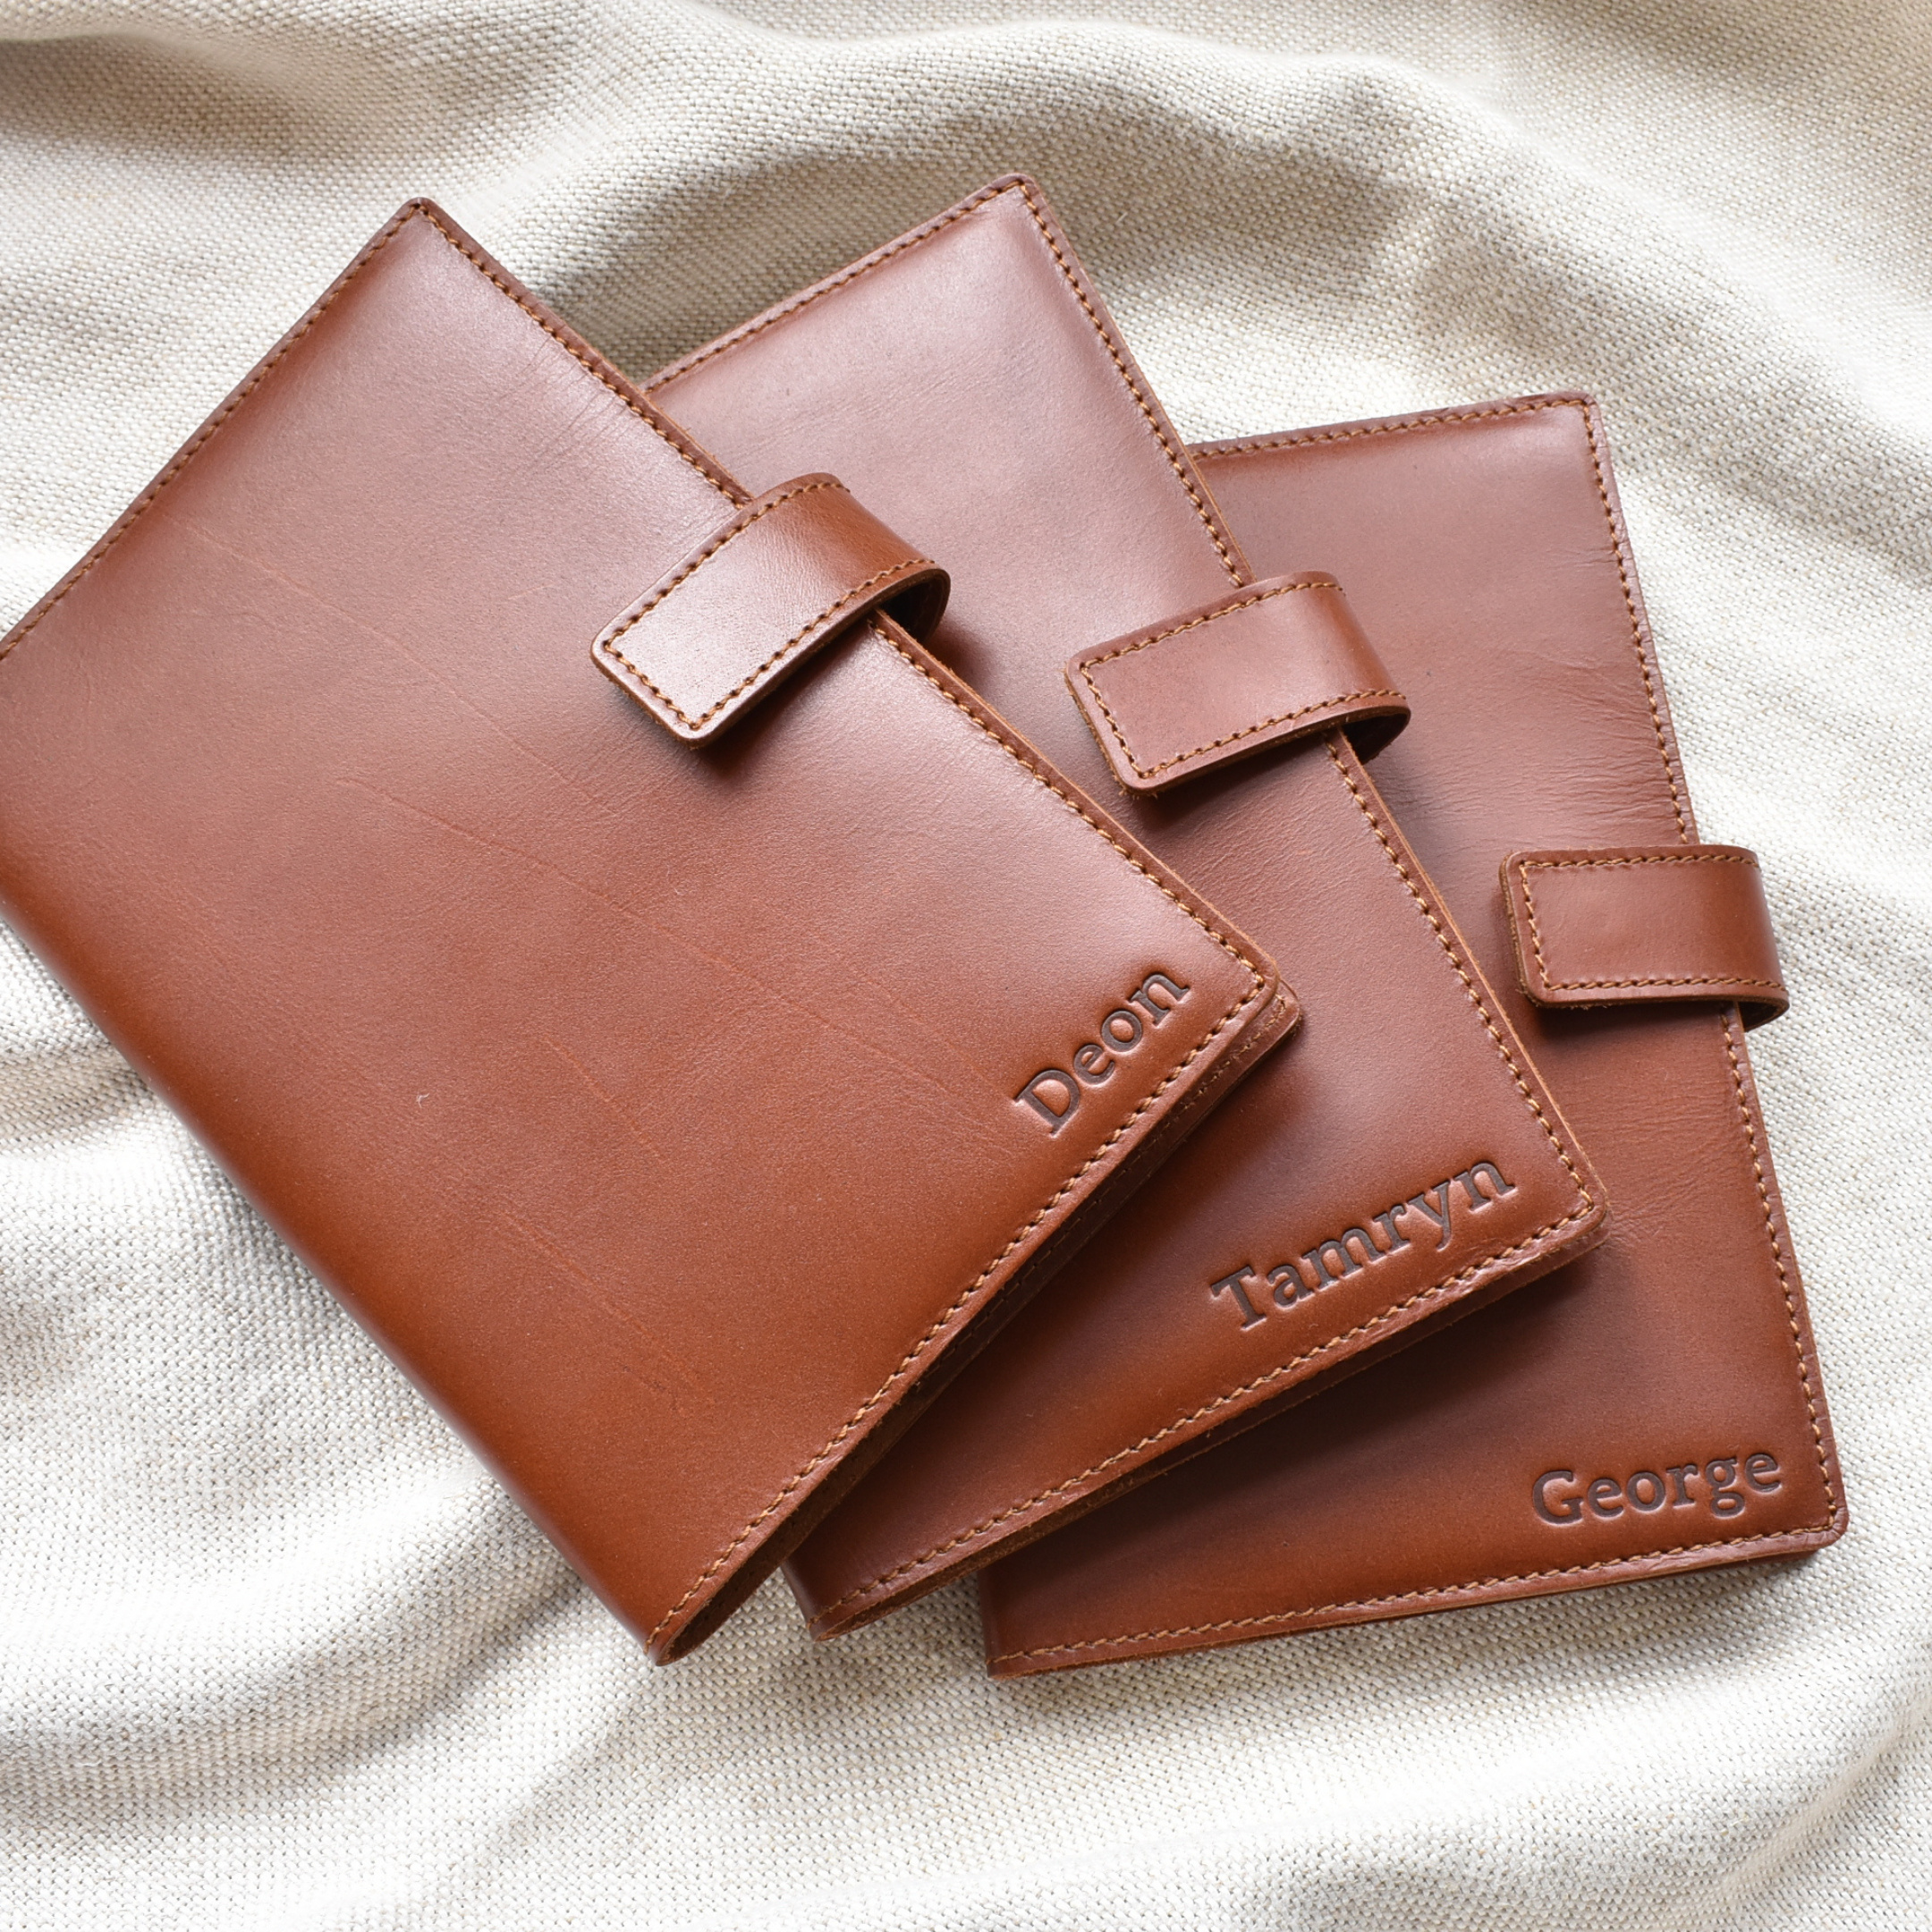 Genuine leather pouch, Luxury craftsmanship, Made in South Africa, Premium quality, 2160x2160 HD Phone